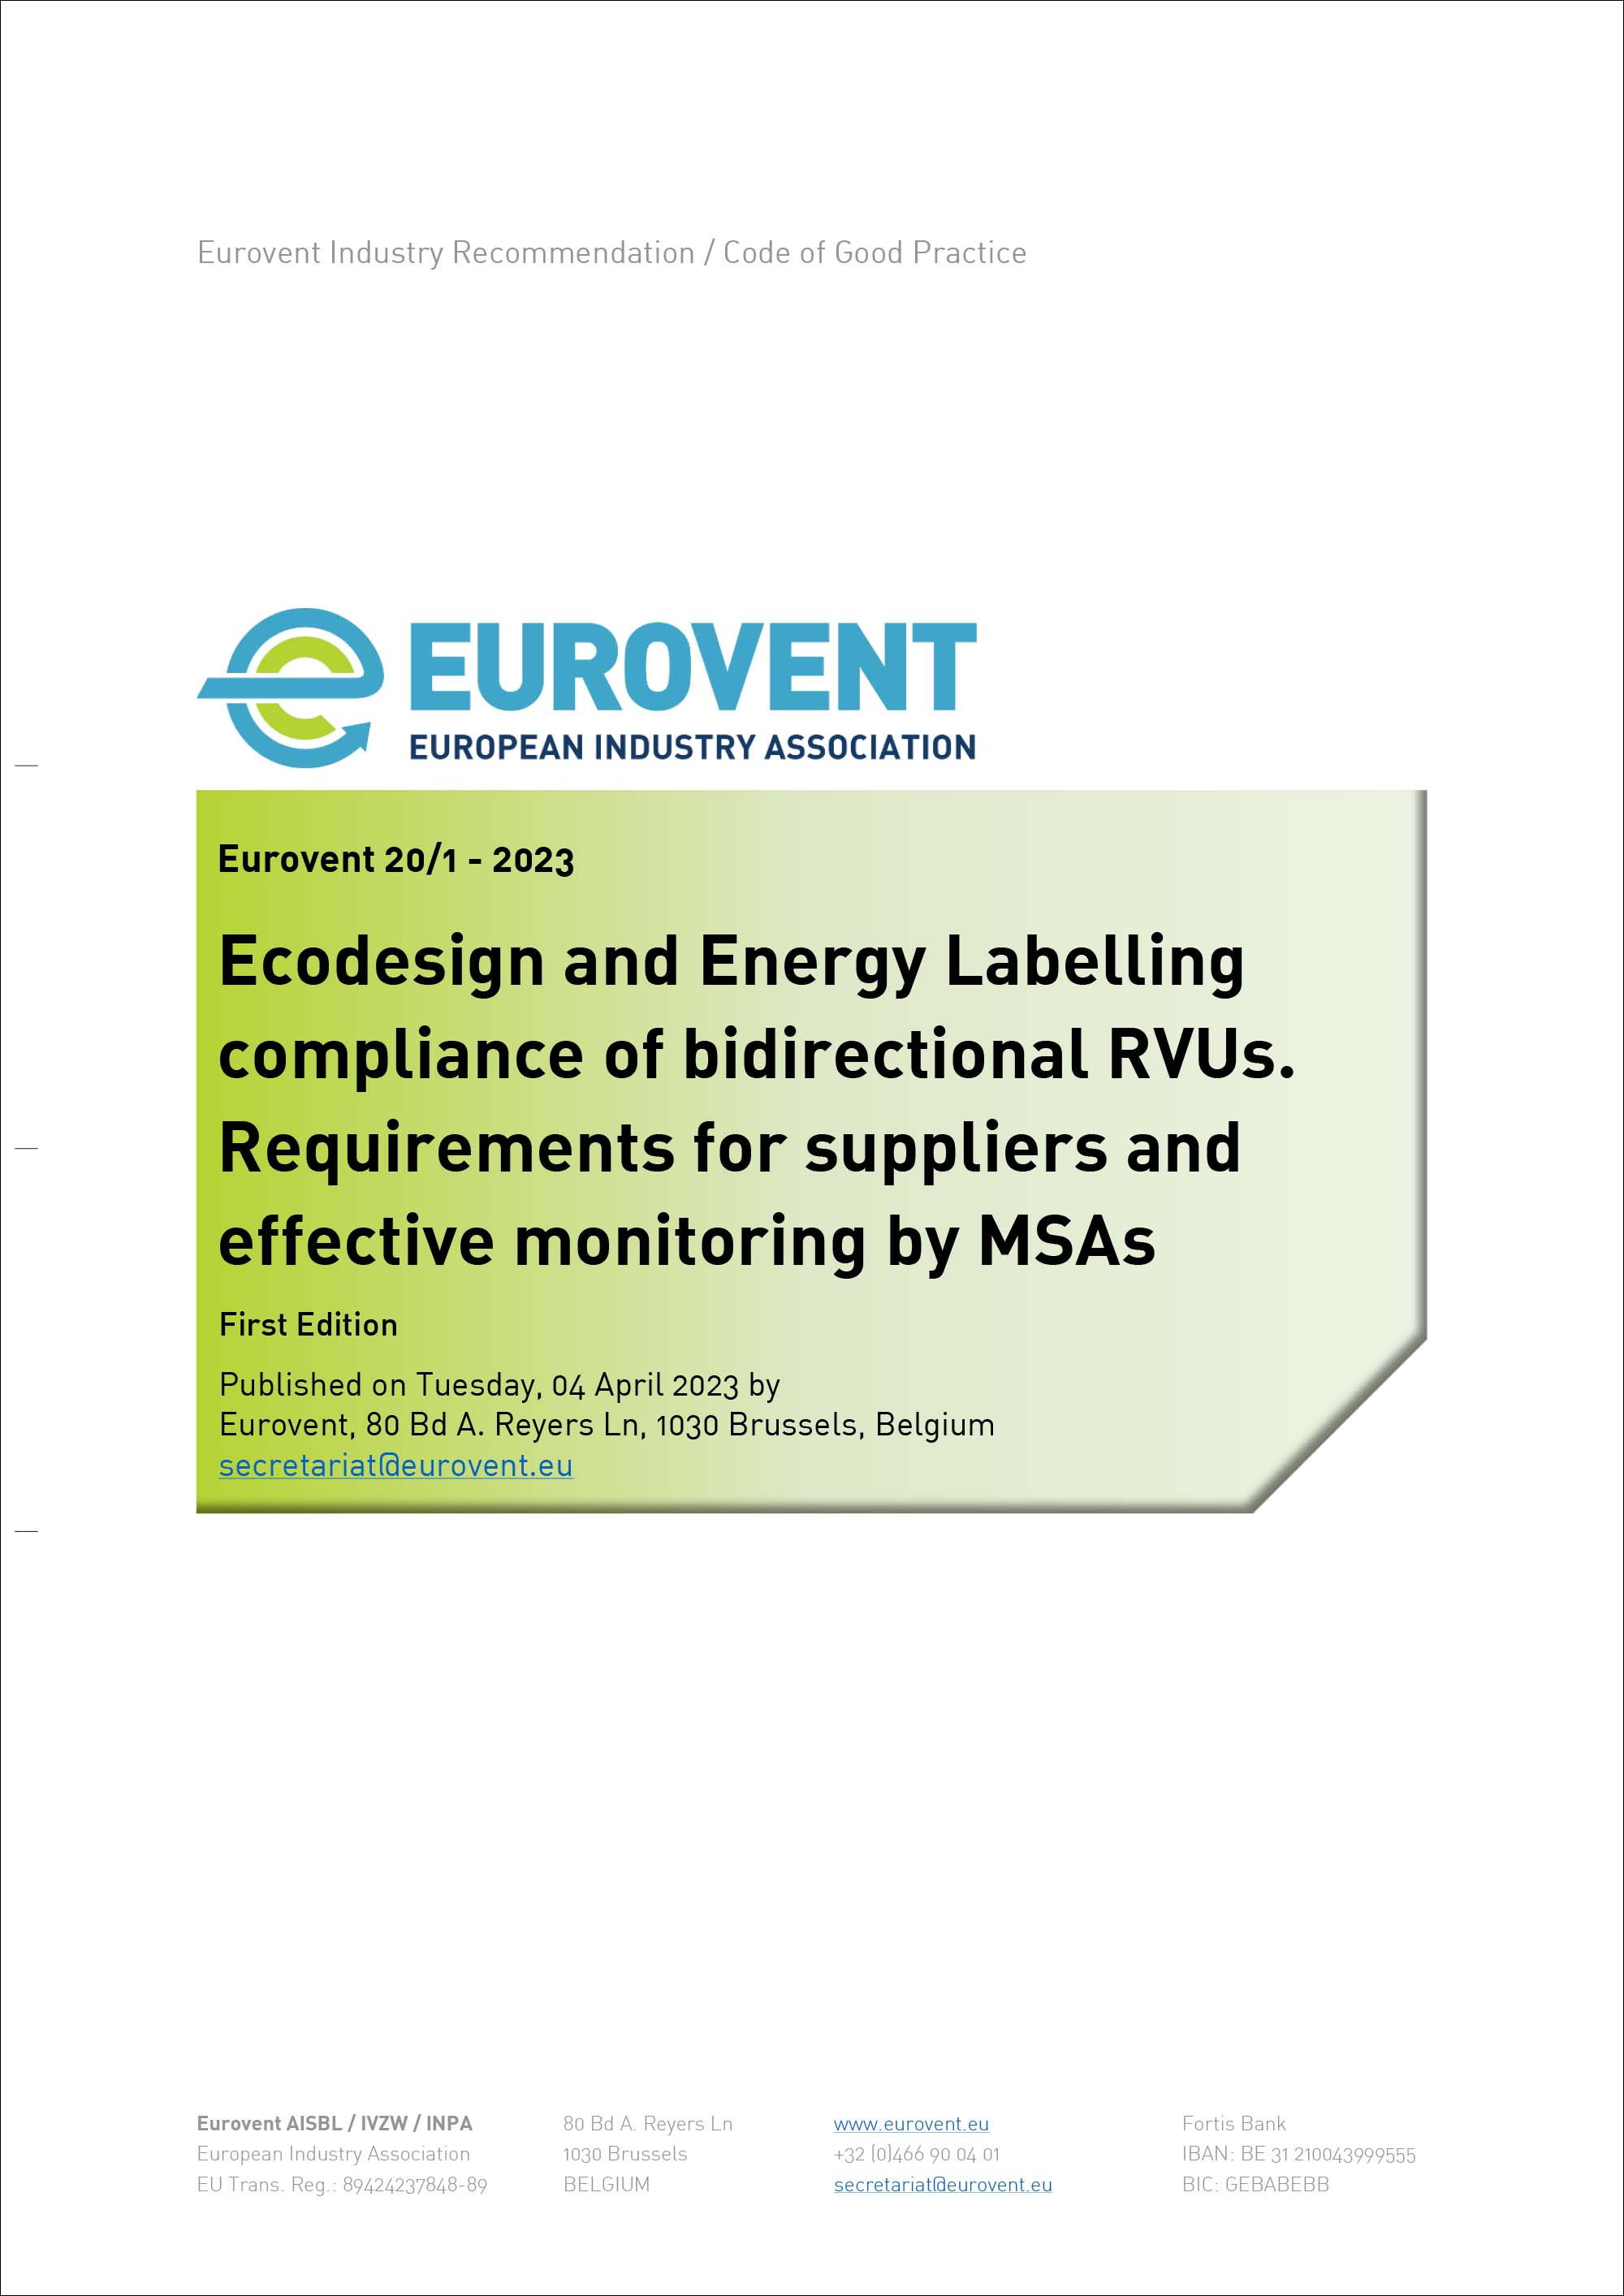 Eurovent 20/1 - 2023: Ecodesign and Energy Labelling compliance of bidirectional RVUs - Requirements for suppliers and effective monitoring by MSAs